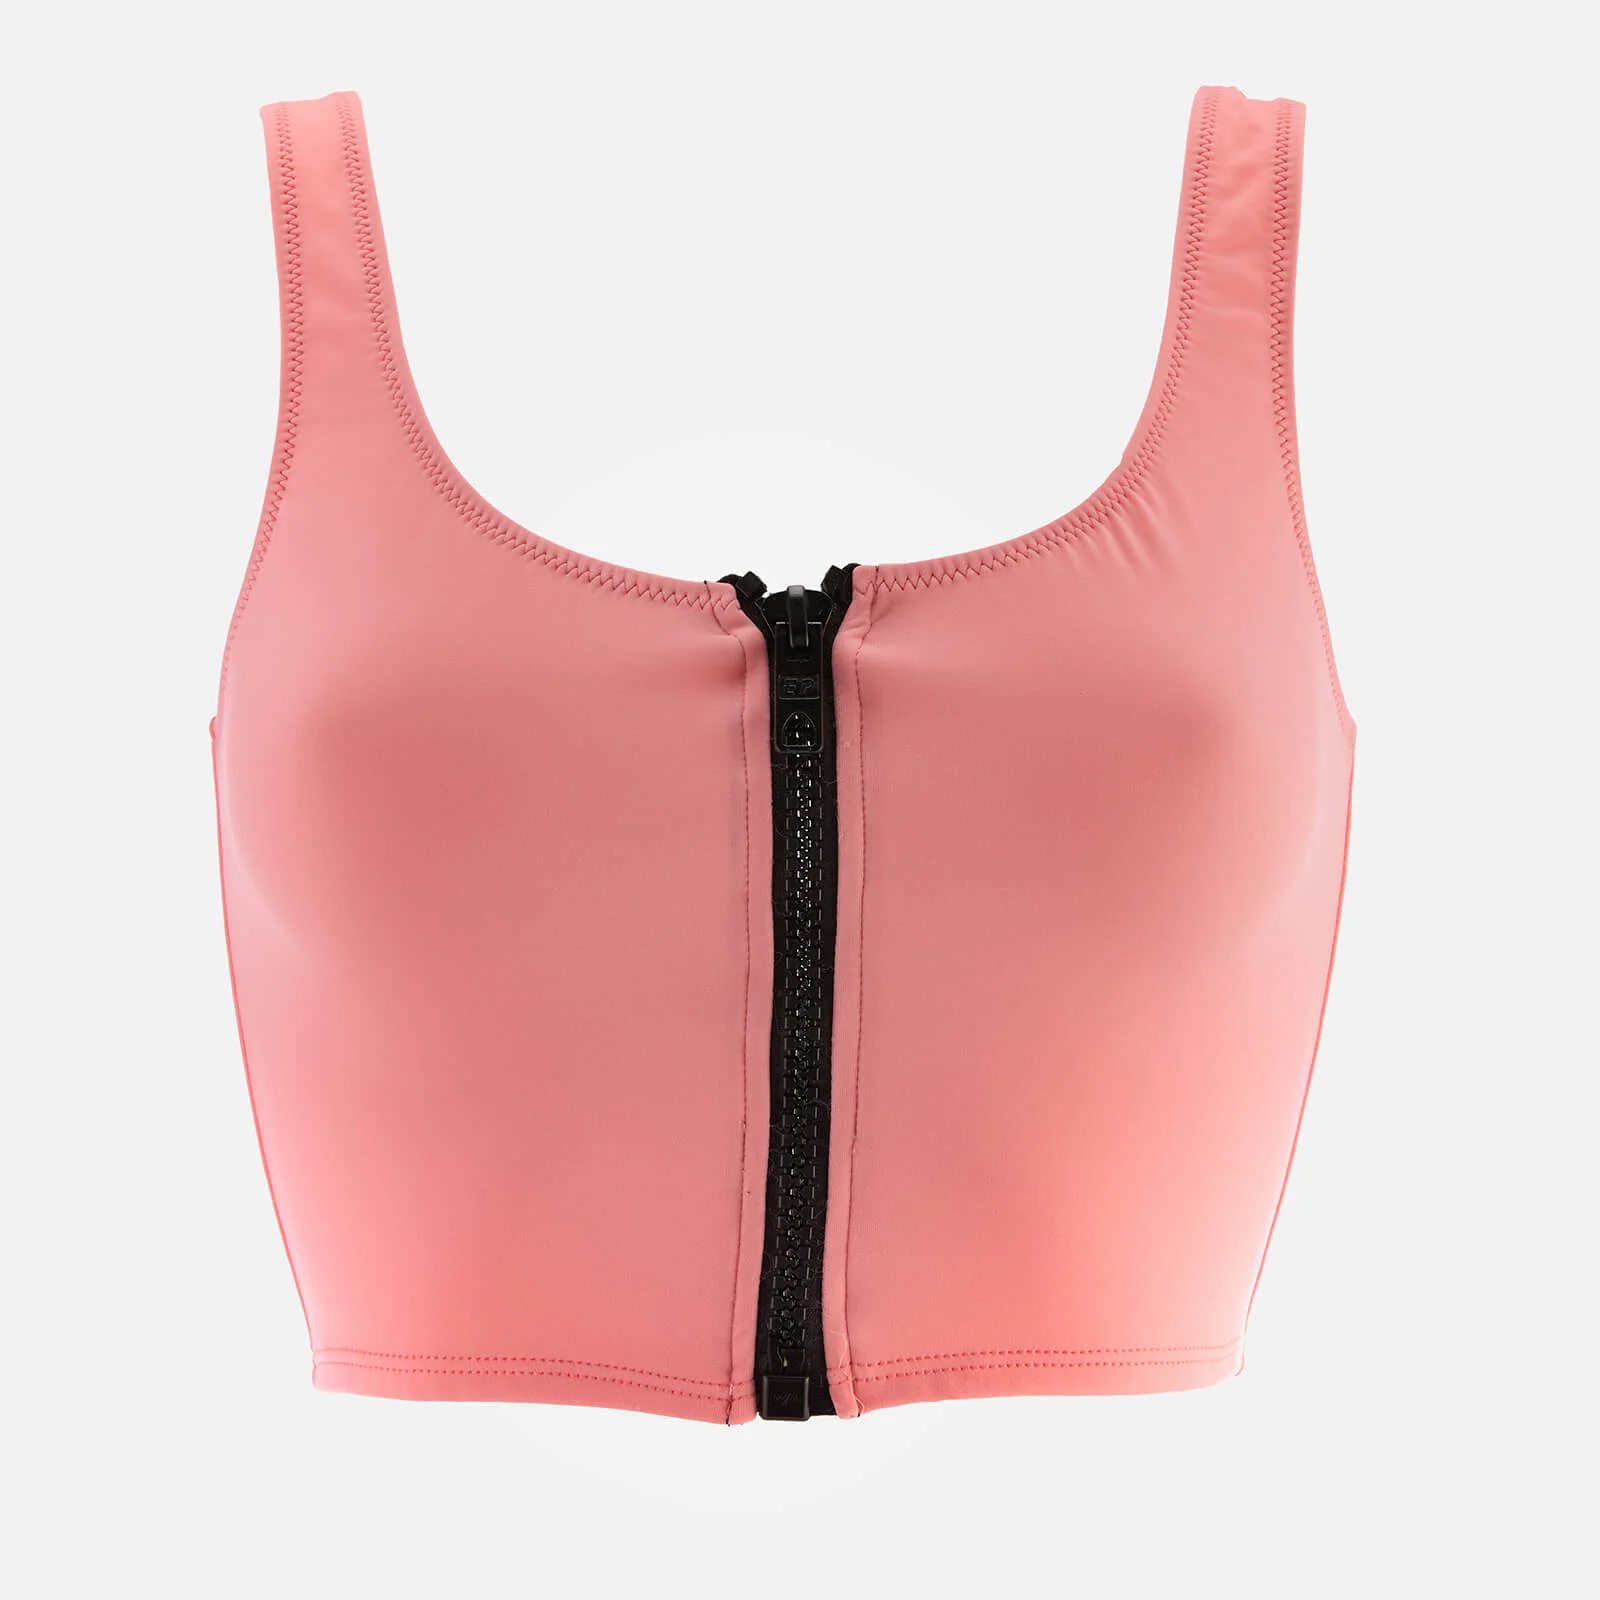 Solid & Striped Women's The Christie Flamingo Top - Pink Black Image 1